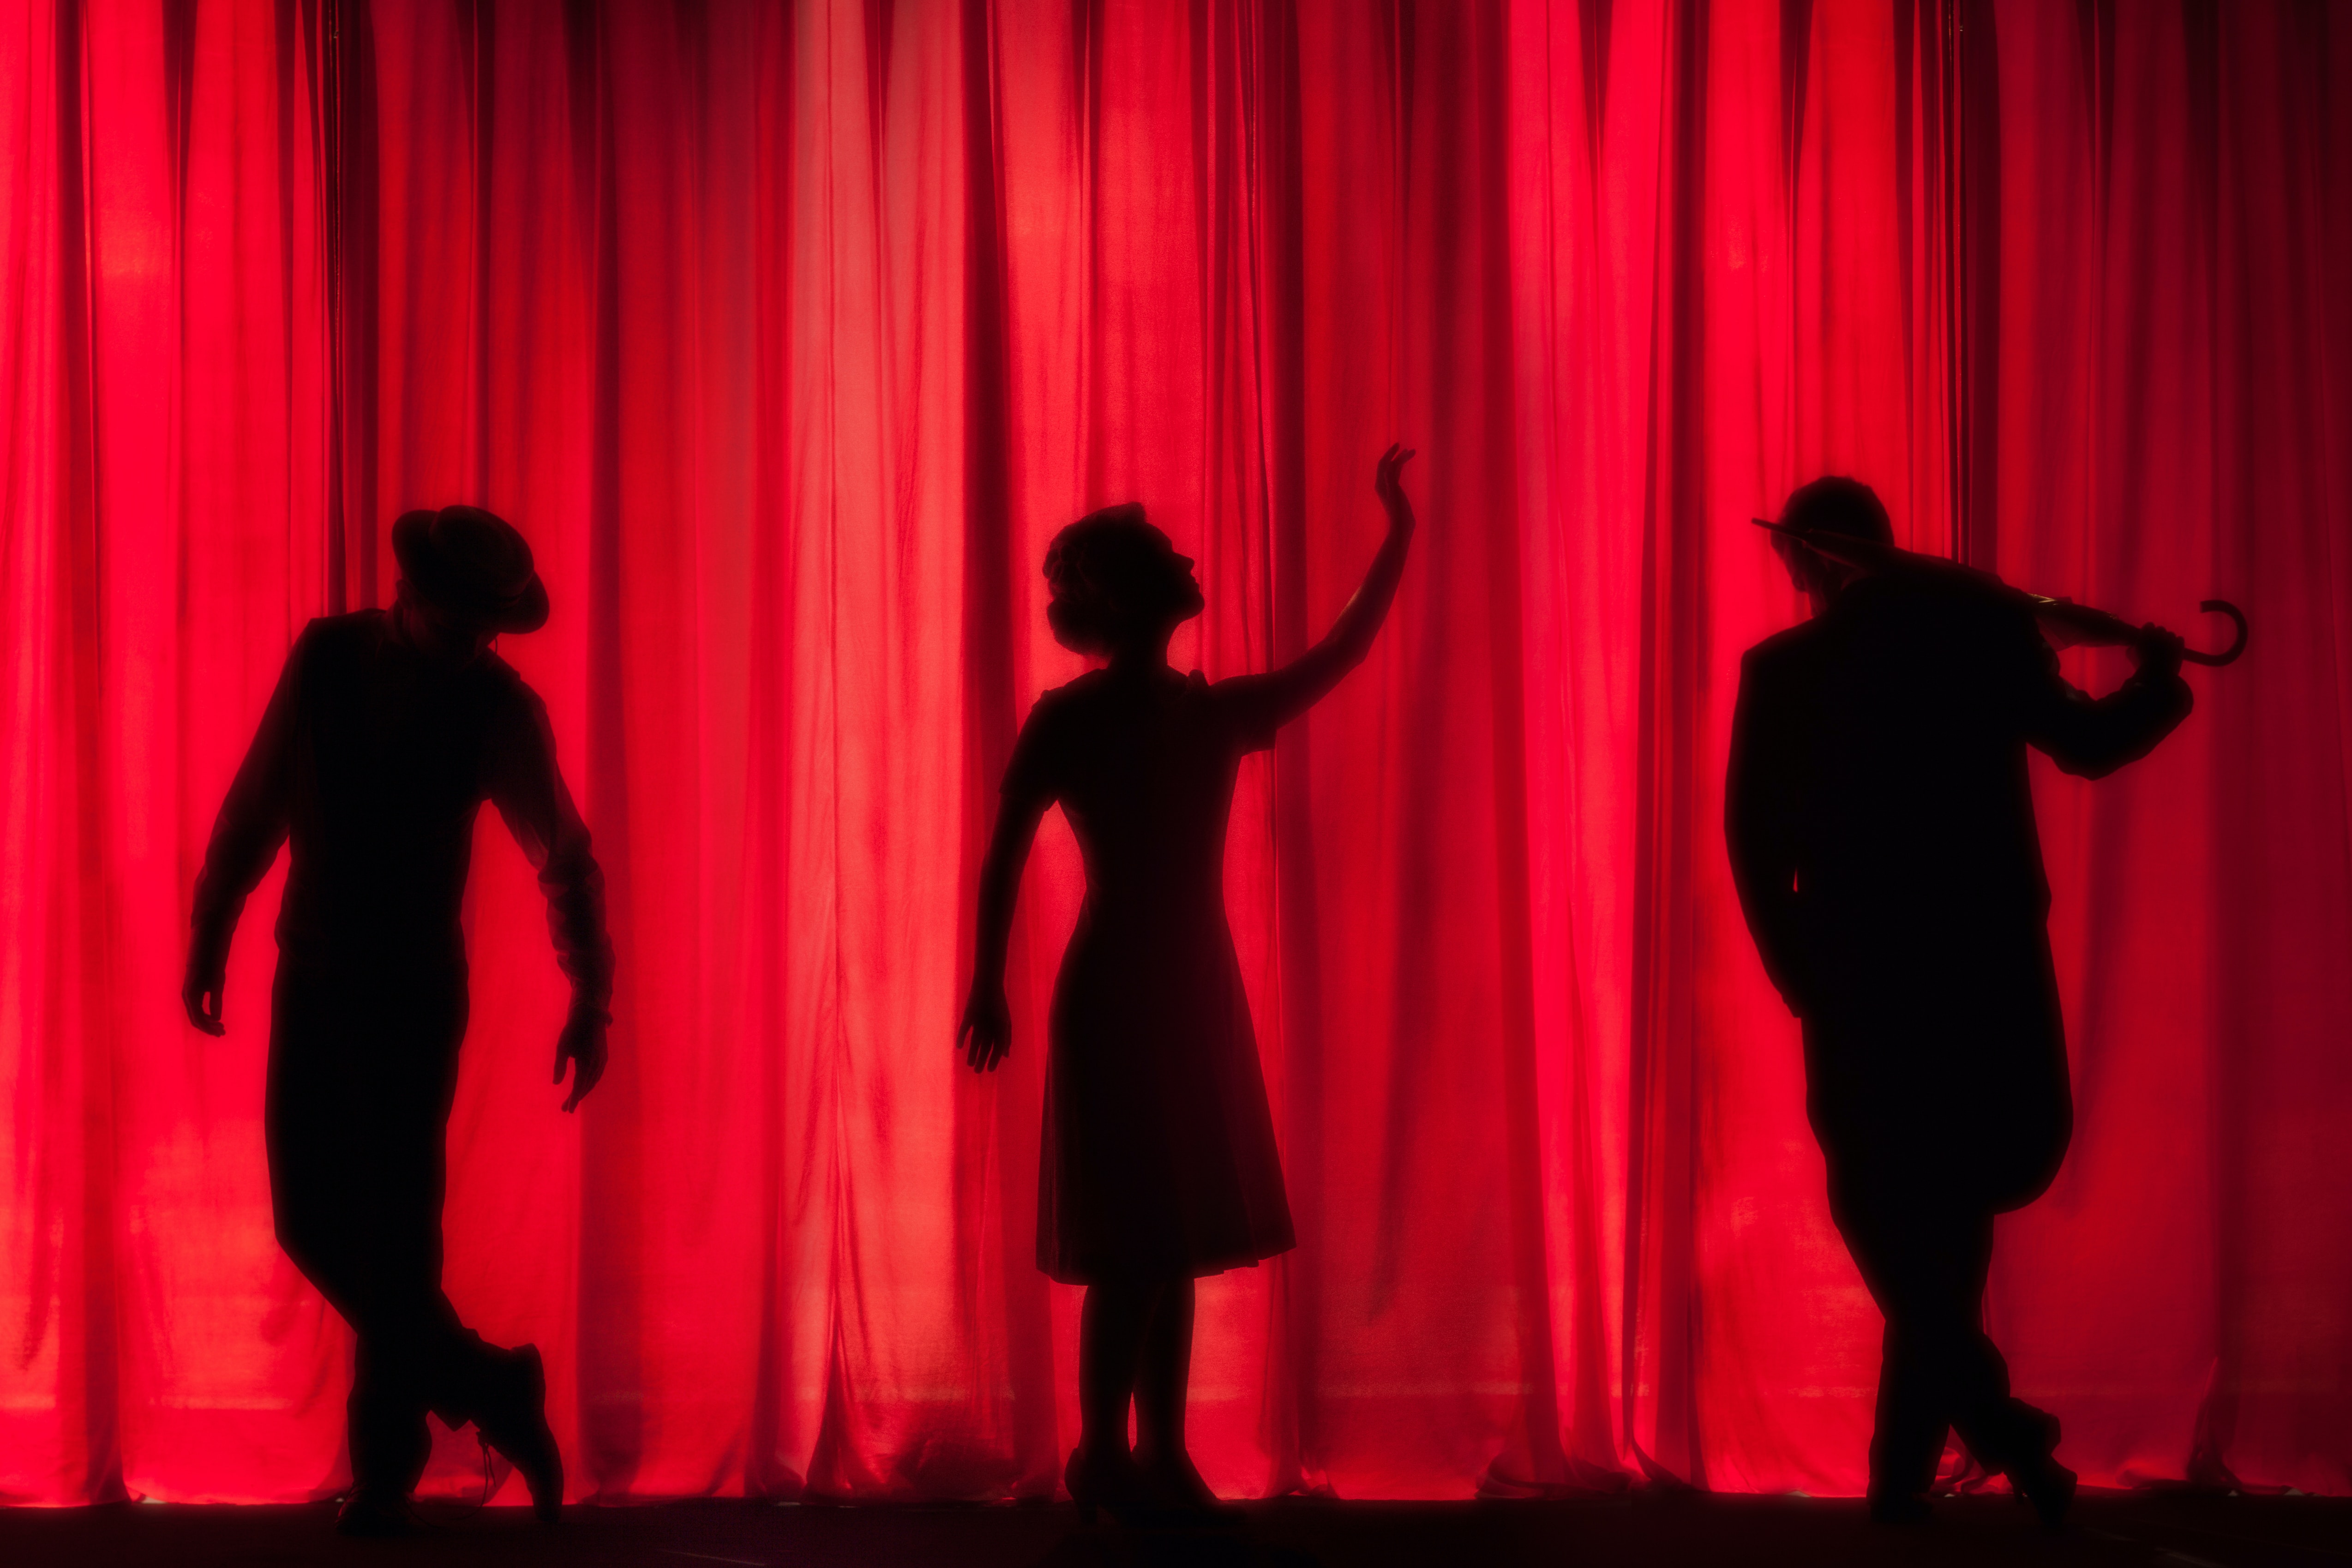 Three silhouettes behind a red theatre curtain, of a jaunty man in a flat cap, a woman in a dress gesticulating dramatically upward, and someone holding a fiddle.